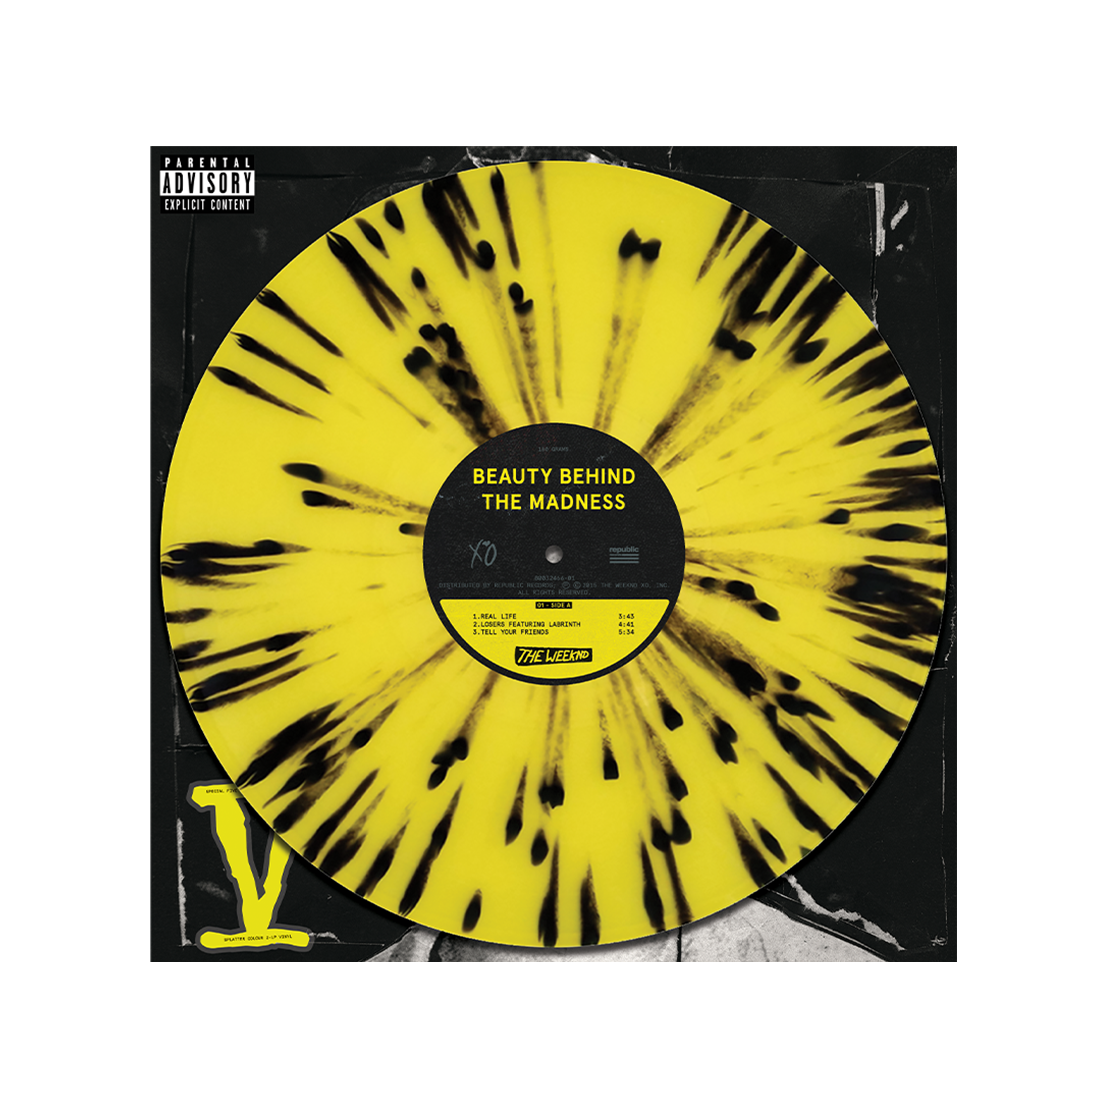 The Weeknd, BEAUTY BEHIND THE MADNESS 5-YEAR EDITION 2LP